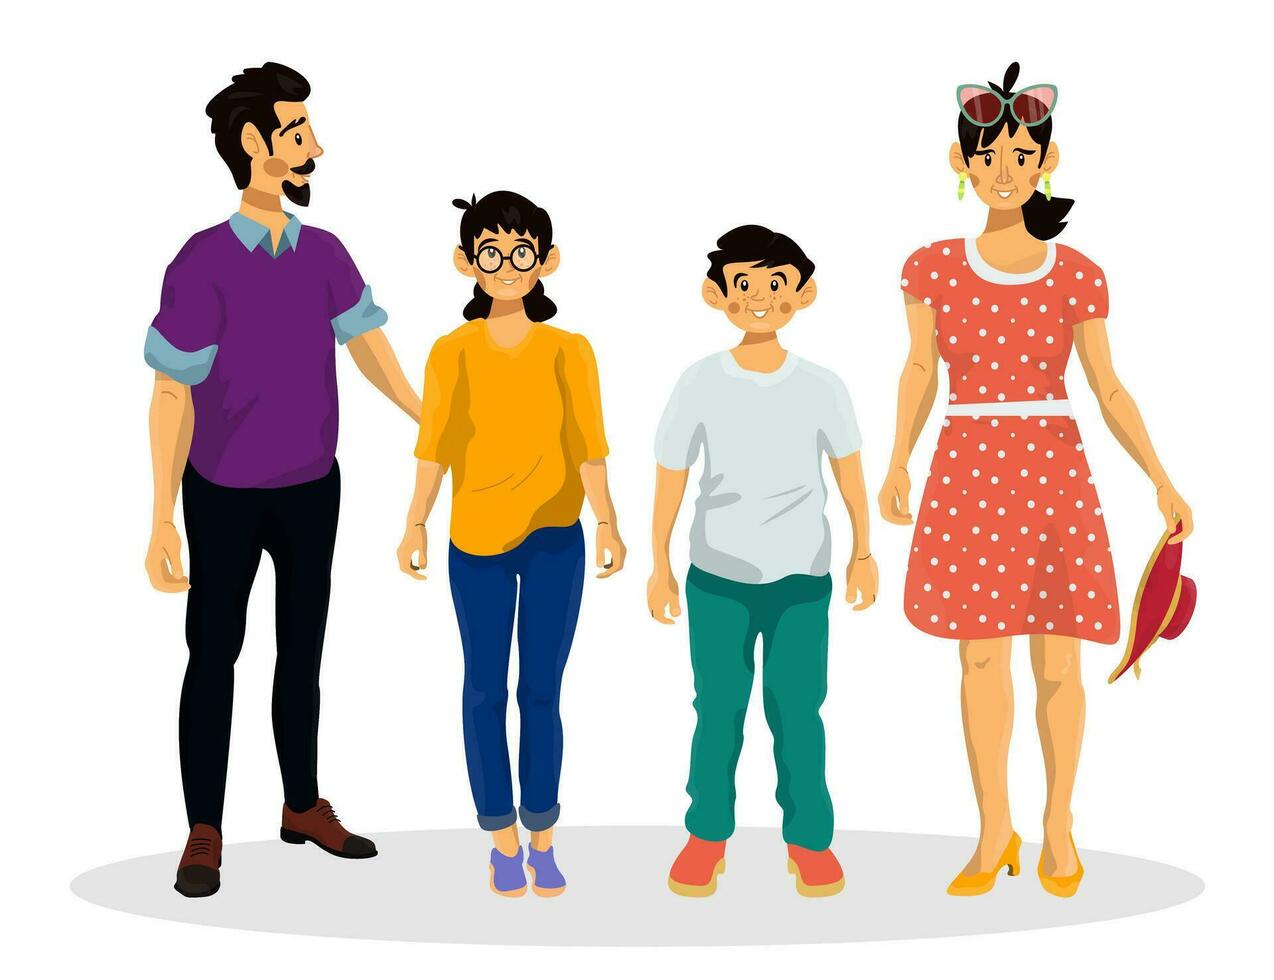 Vector cartoon illustration of happy family. Dad, mom, and their children son and daughter.